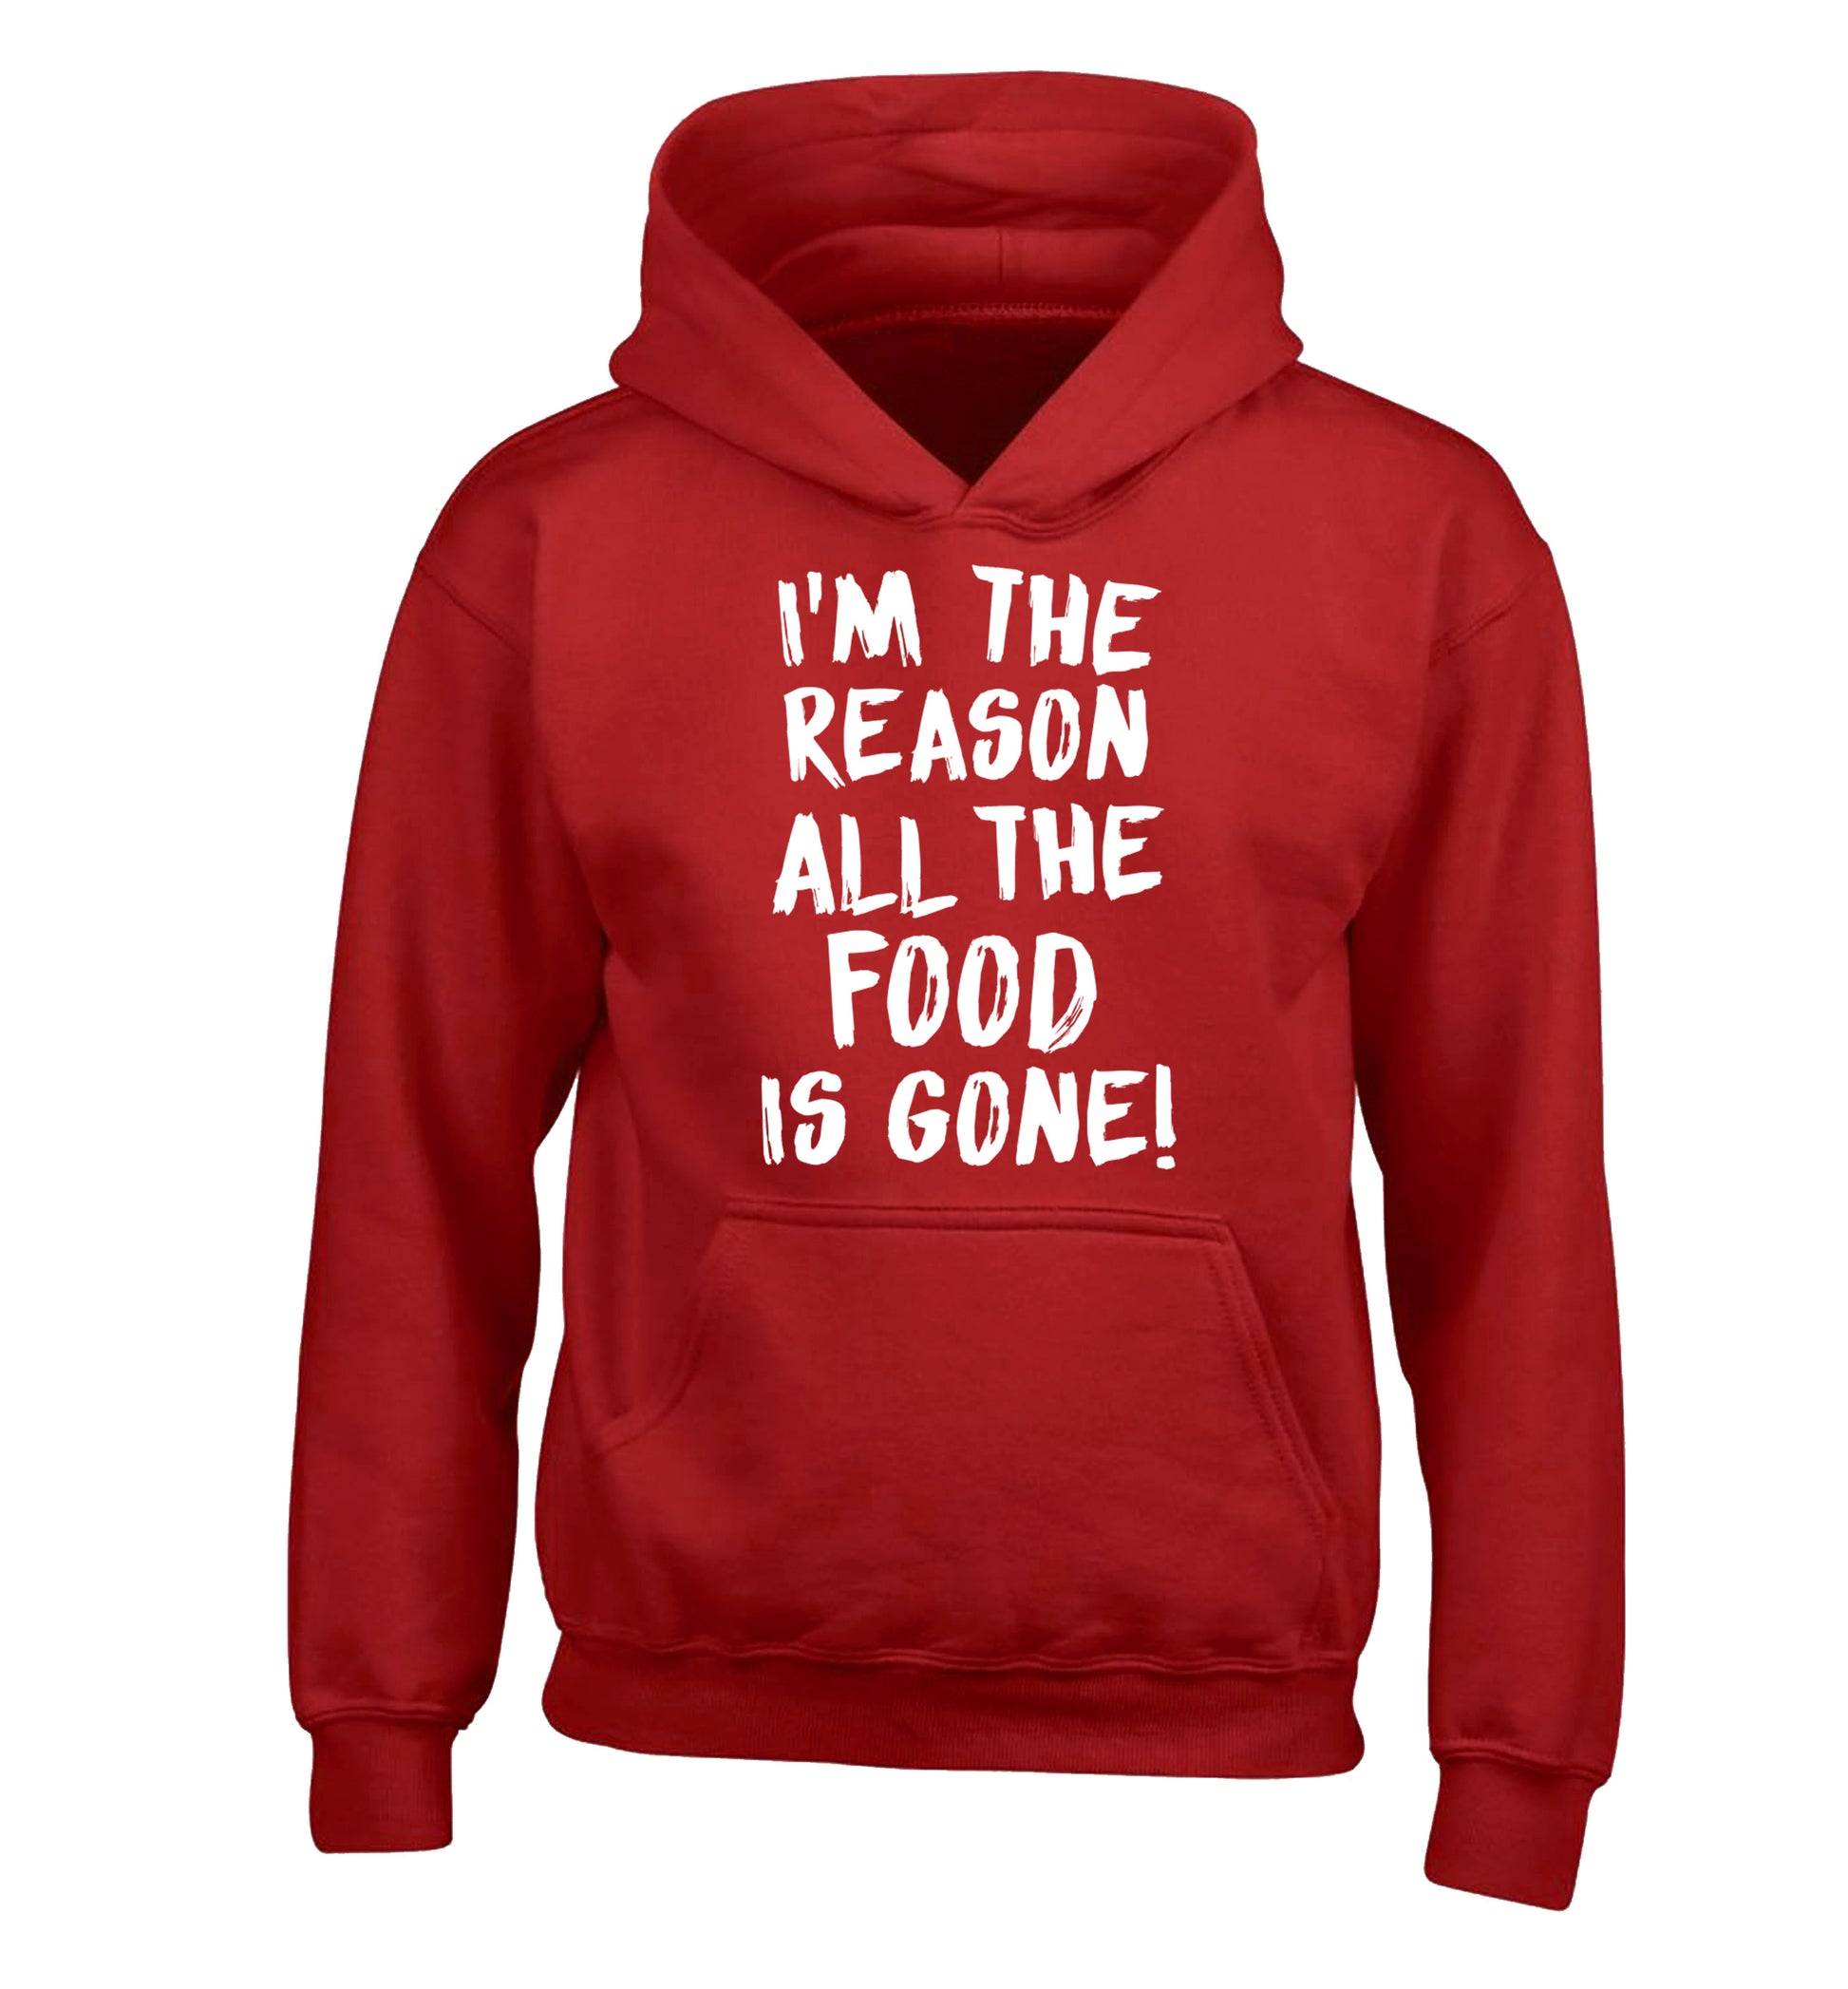 I'm the reason why all the food is gone children's red hoodie 12-13 Years